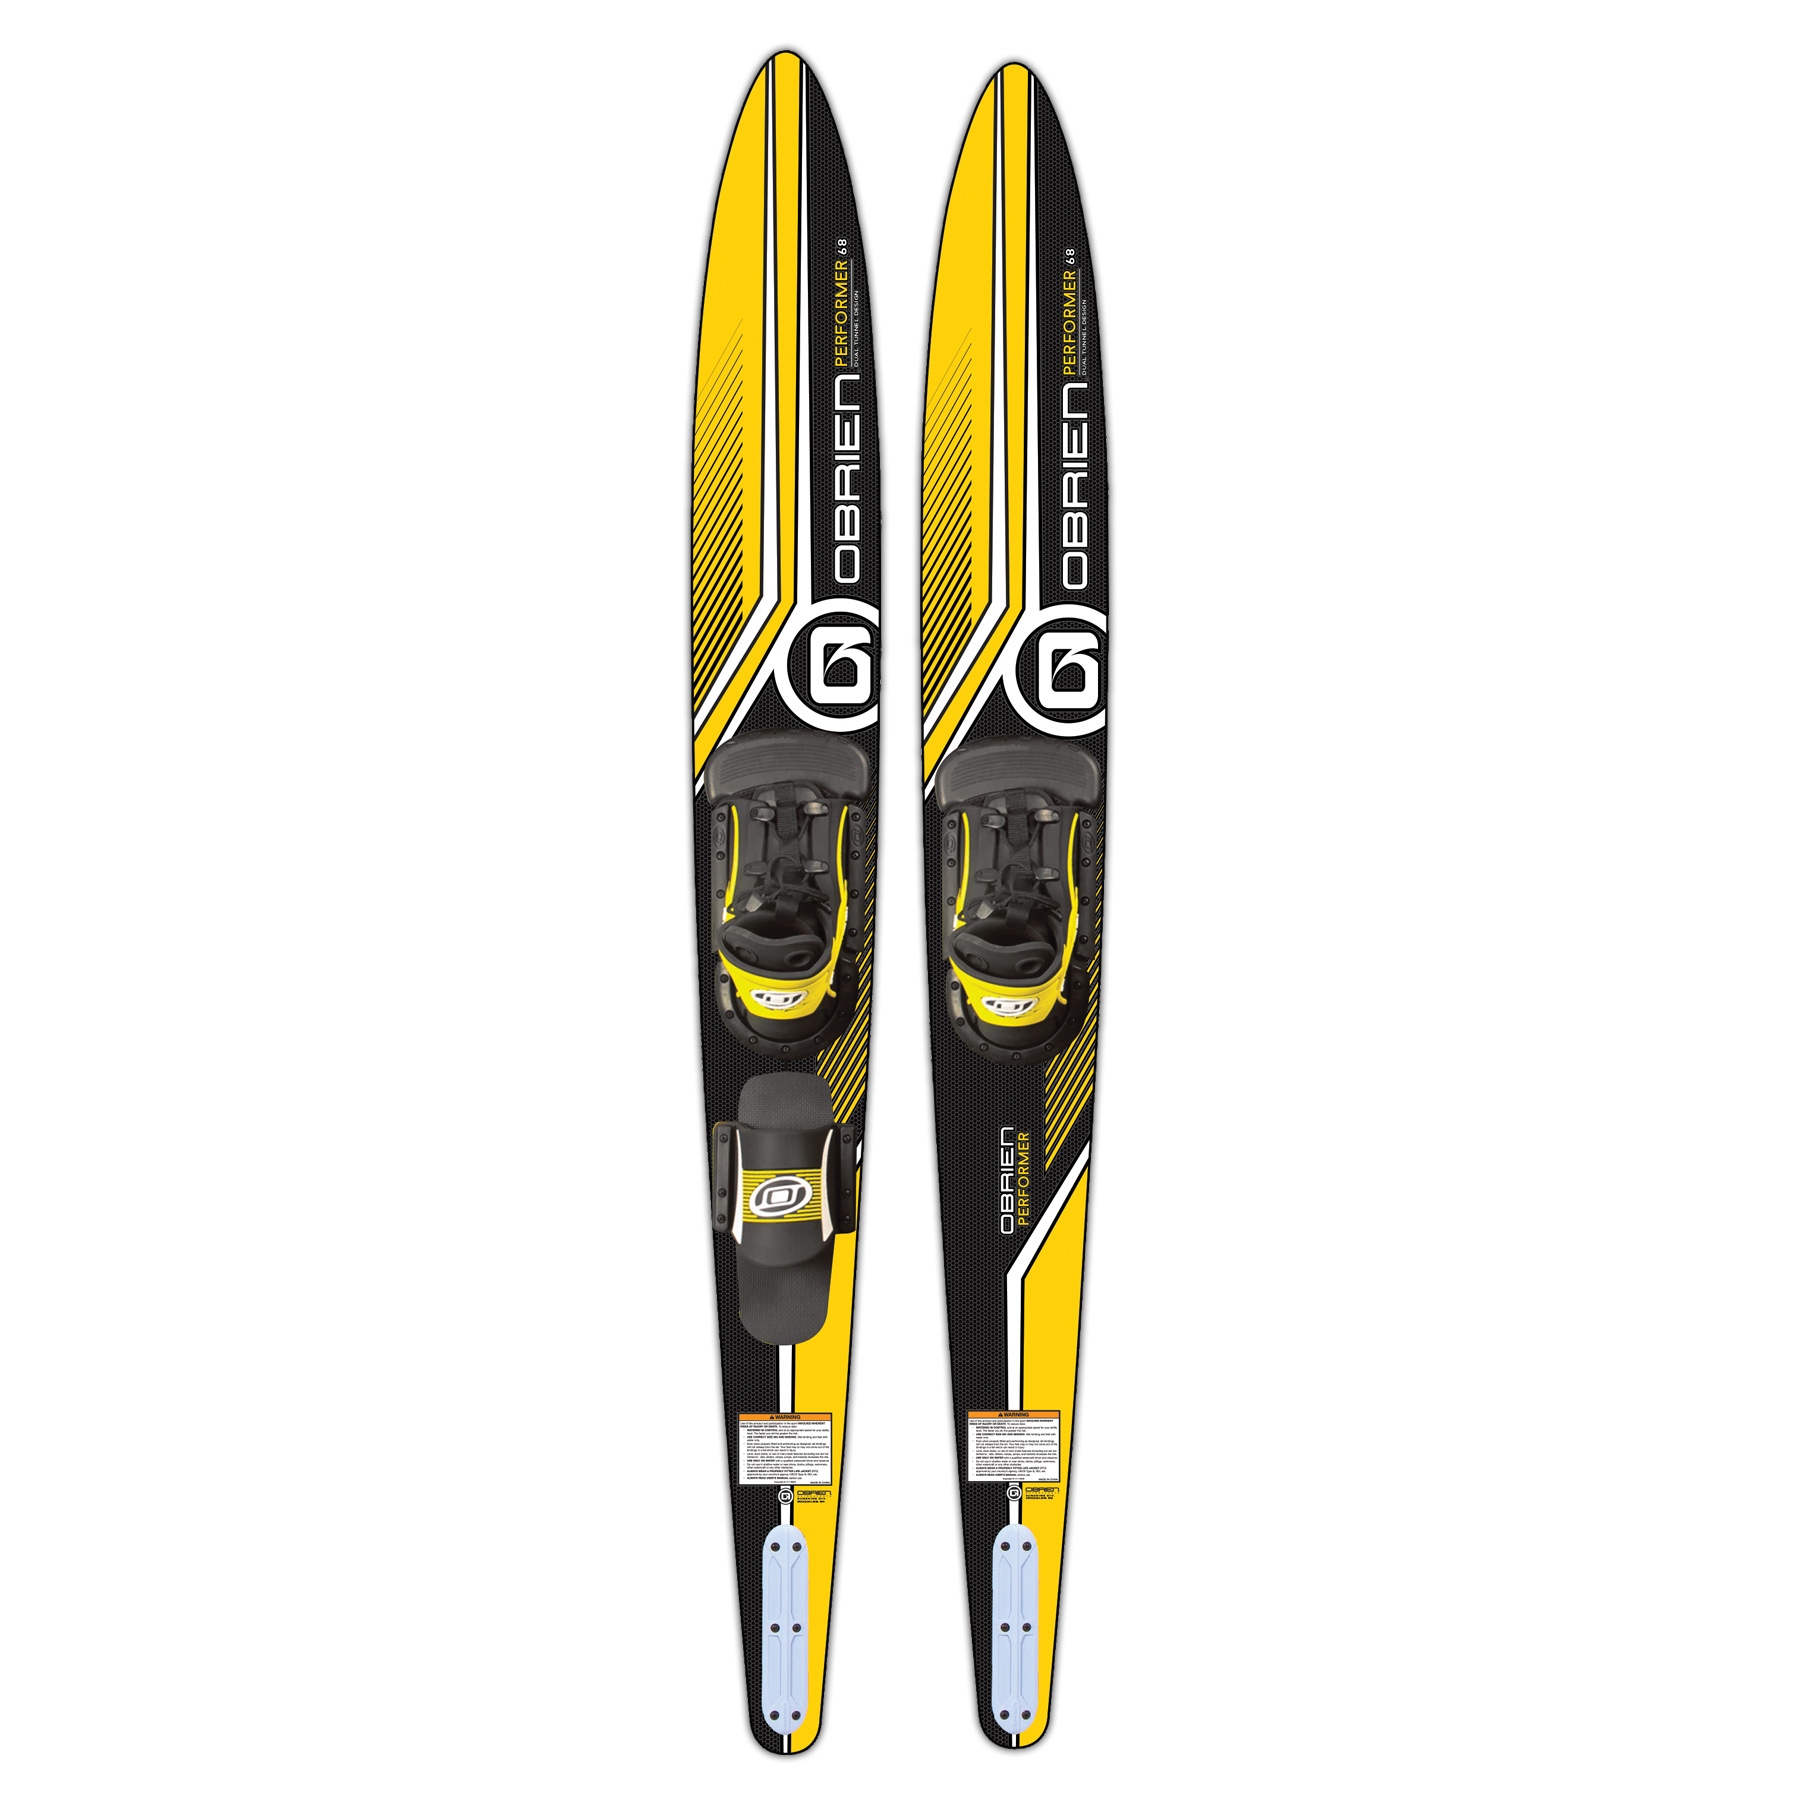 O'Brien Performer Combo Skis w/X-8 RT STD Boots (5-13) - image 1 of 3